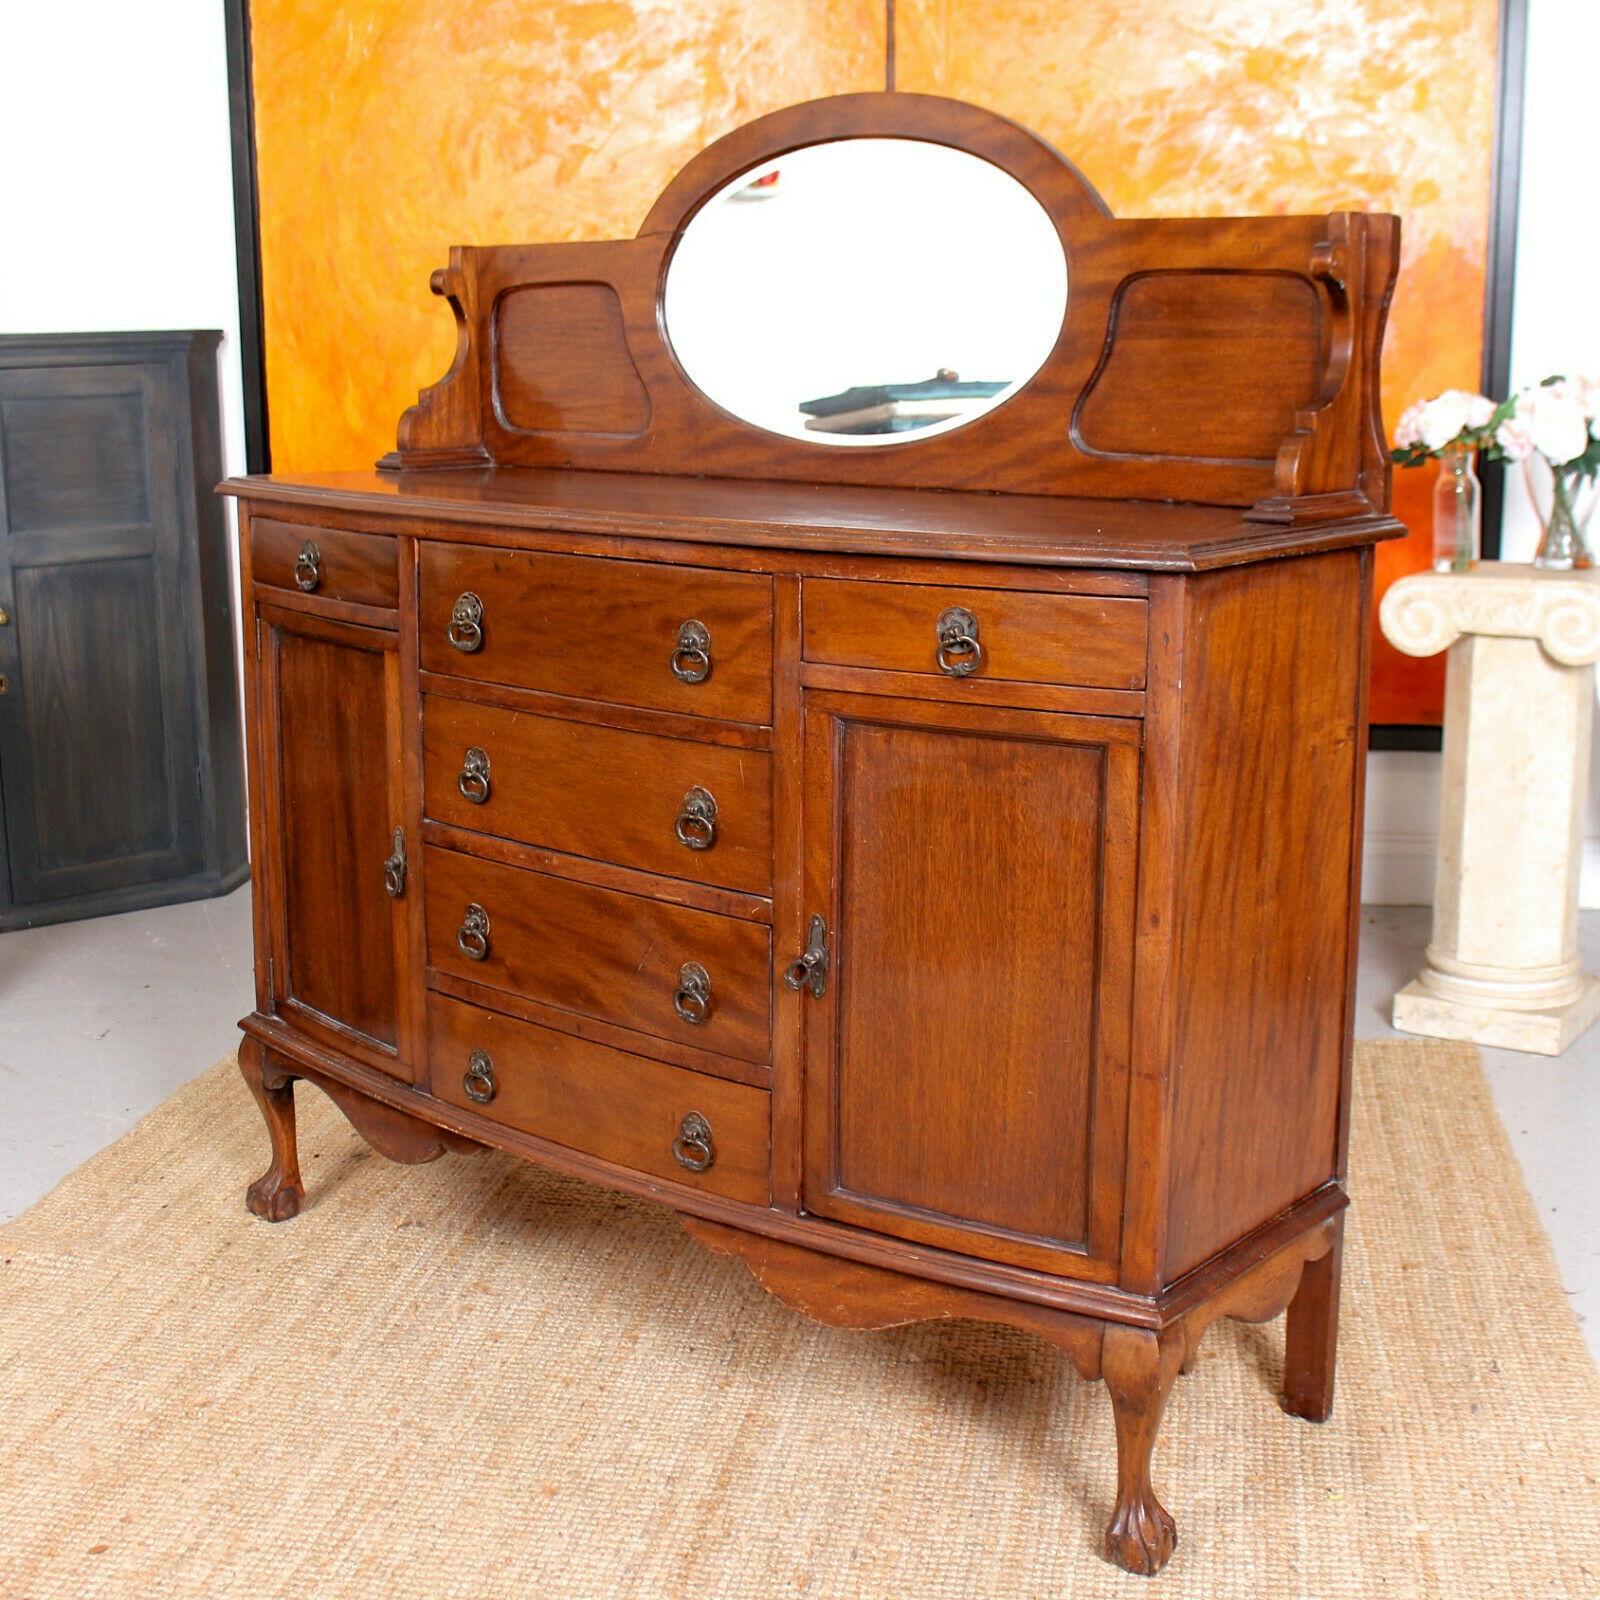 English Sideboard Arts & Crafts Mahogany Credenza, 19th Century In Good Condition For Sale In Newcastle upon Tyne, GB